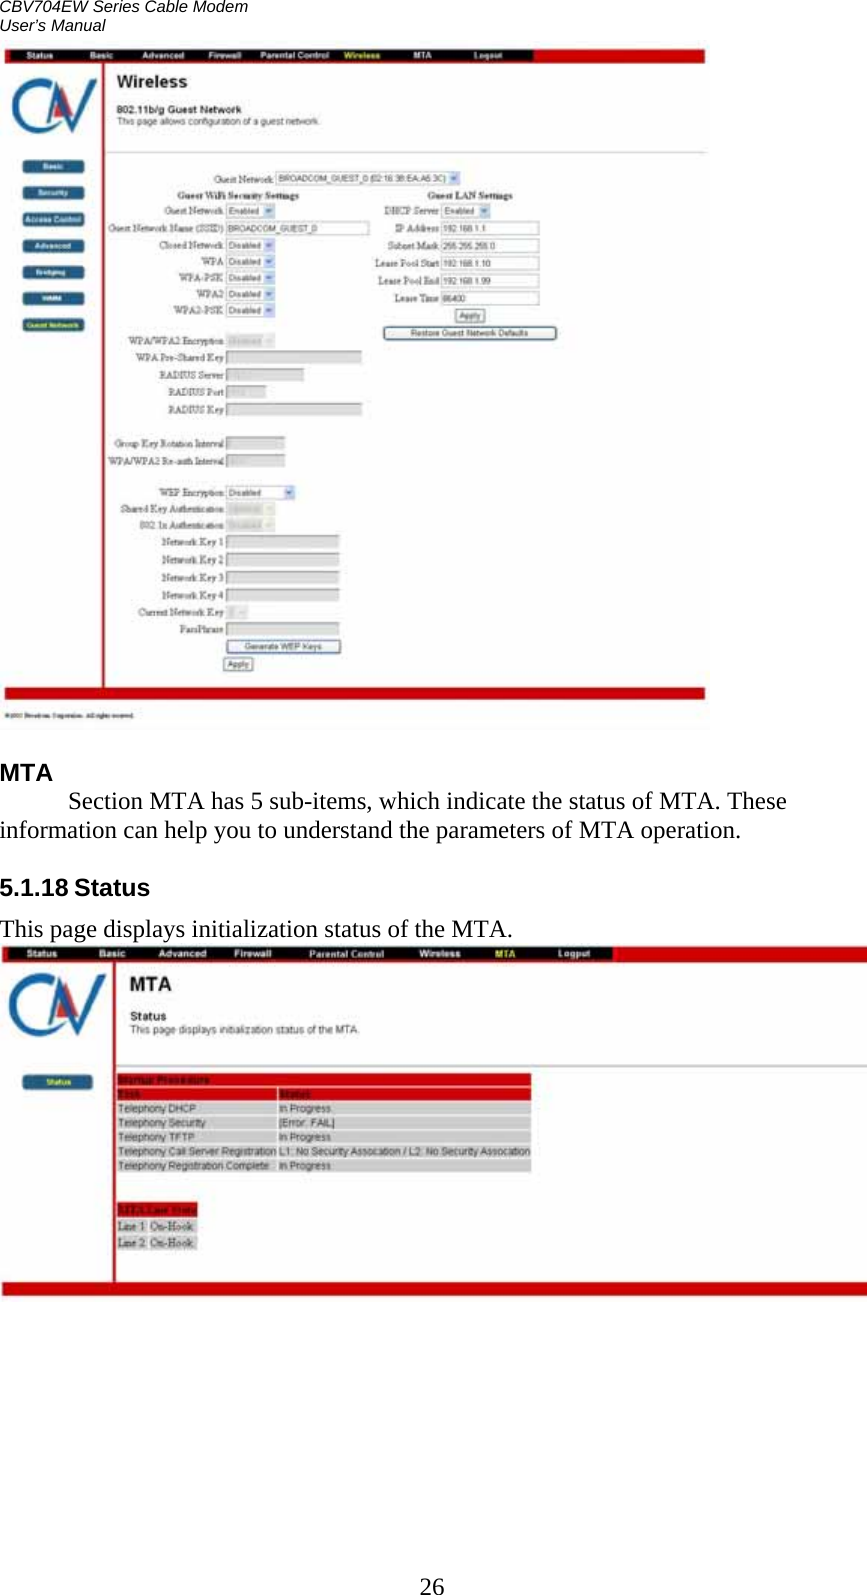 CBV704EW Series Cable Modem  User’s Manual 26   MTA            Section MTA has 5 sub-items, which indicate the status of MTA. These information can help you to understand the parameters of MTA operation.  5.1.18 Status This page displays initialization status of the MTA.   